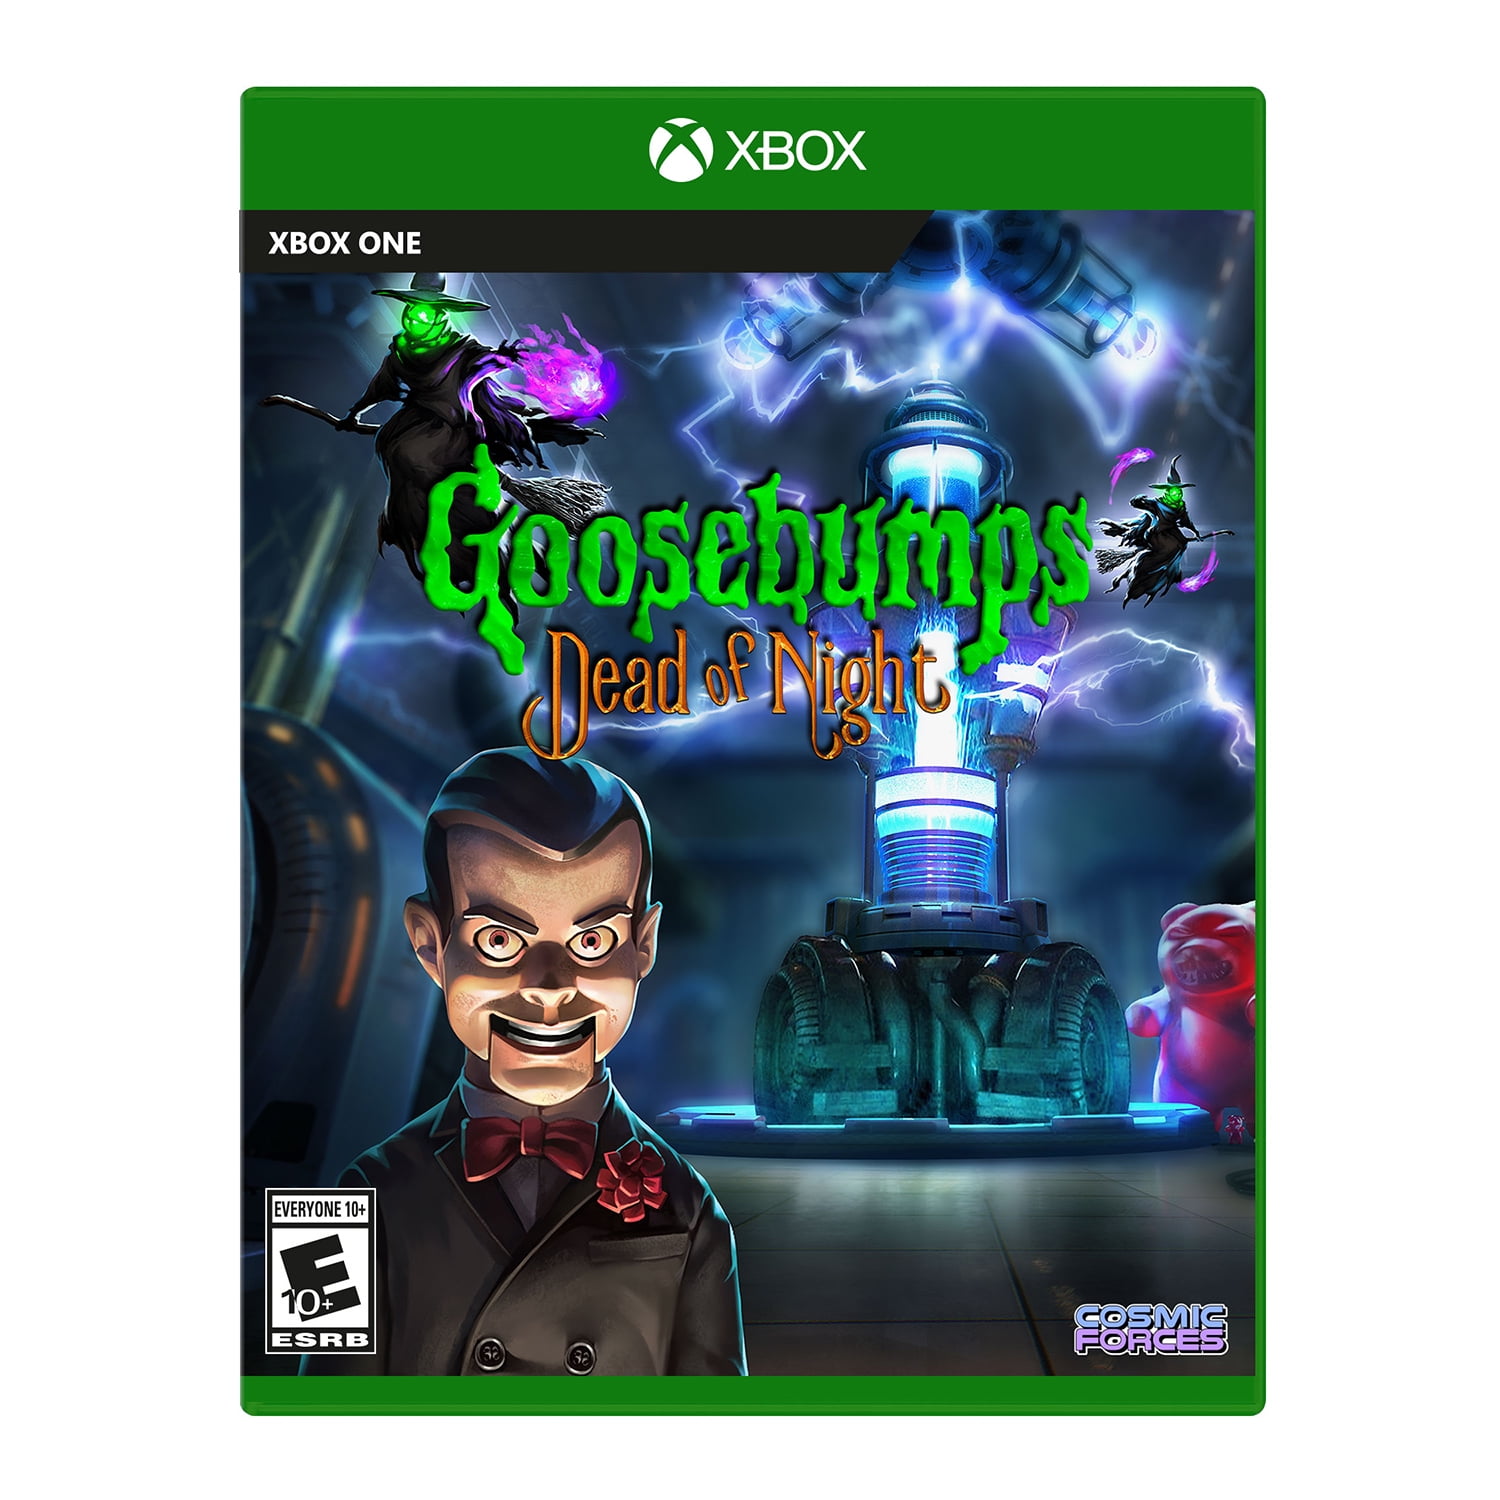 Cosmic Forces Goosebumps Dead of Night, CD, Soundtracks Video Games - Xbox One